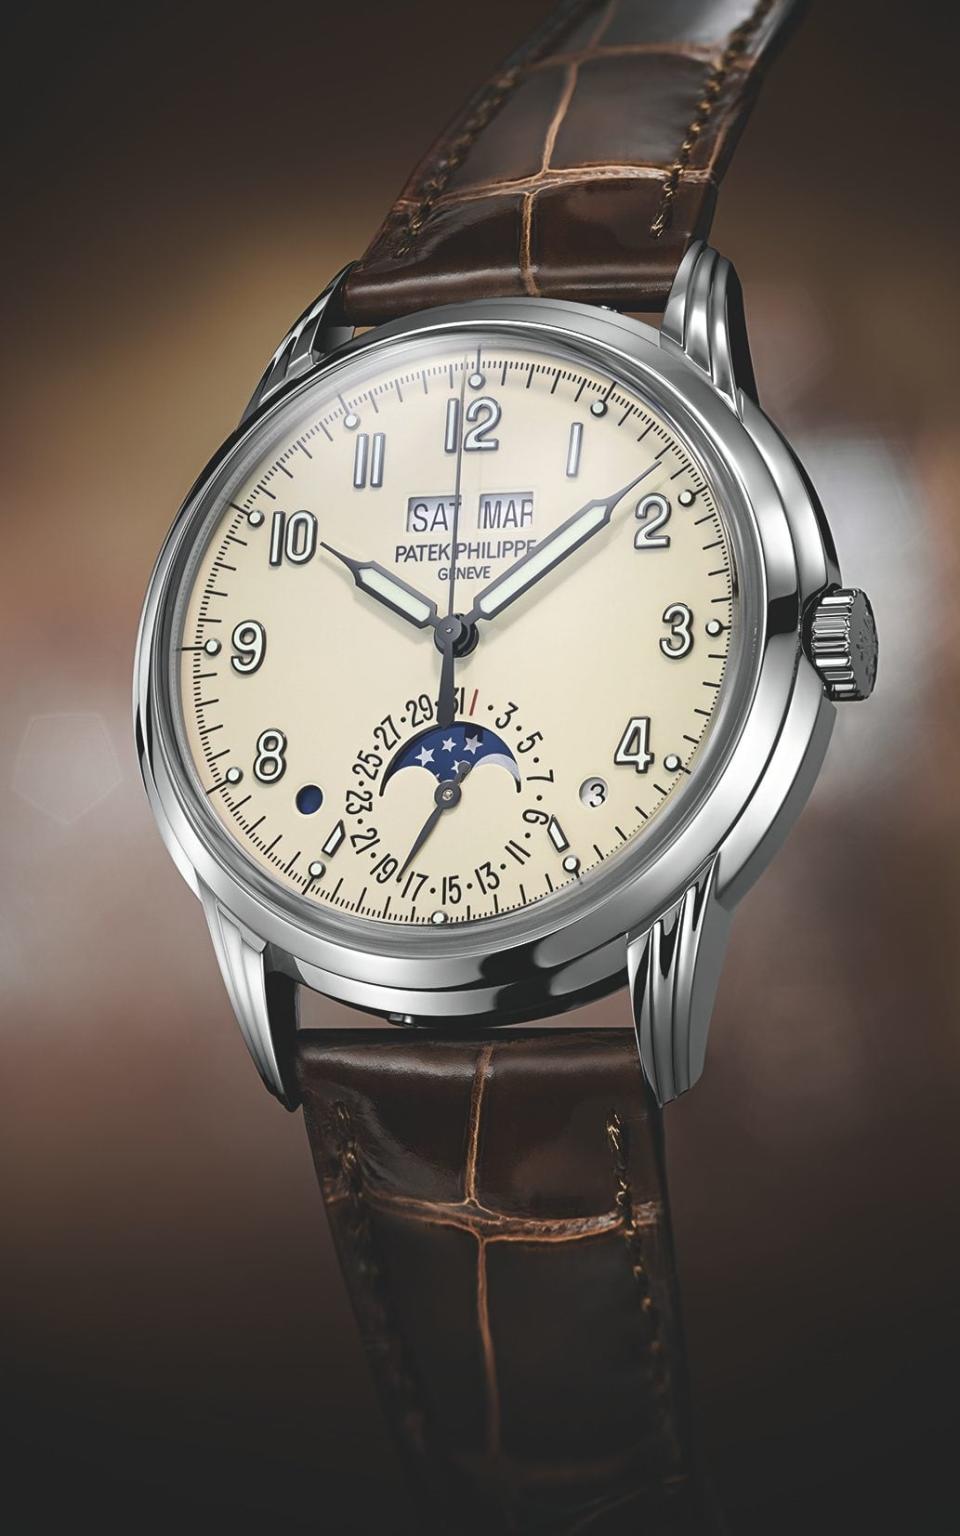 The Ref 5320G Perpetual Calendar with day, month, leap-year cycle and day-night indicator in 18ct white gold, £60,090, Patek Philippe - Protected by Copyright